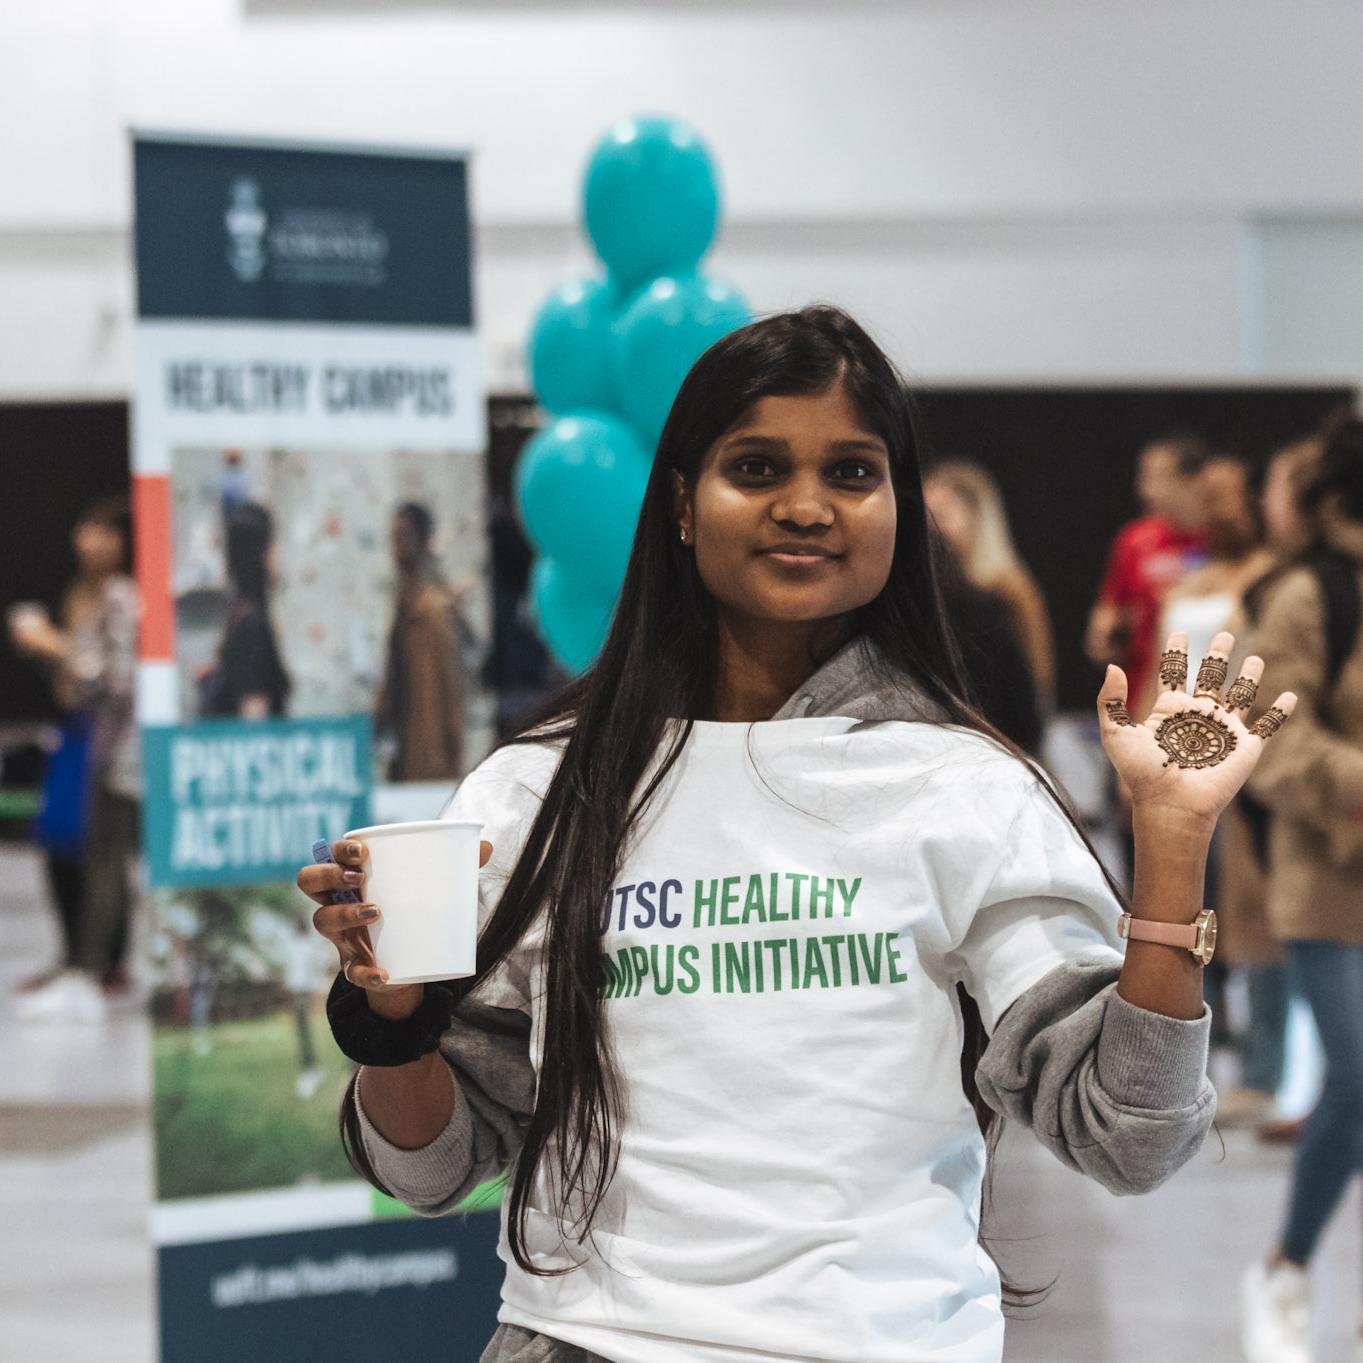 Student promoting health services at campus fair